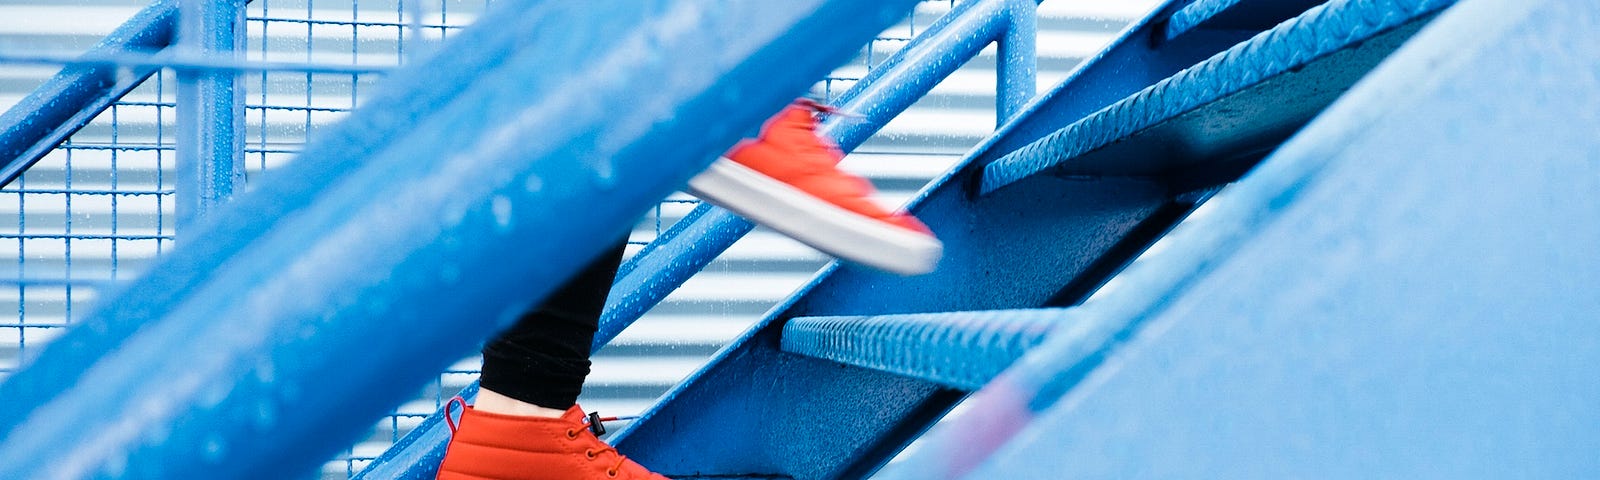 A person with red shoes walking up blue steps; side angle